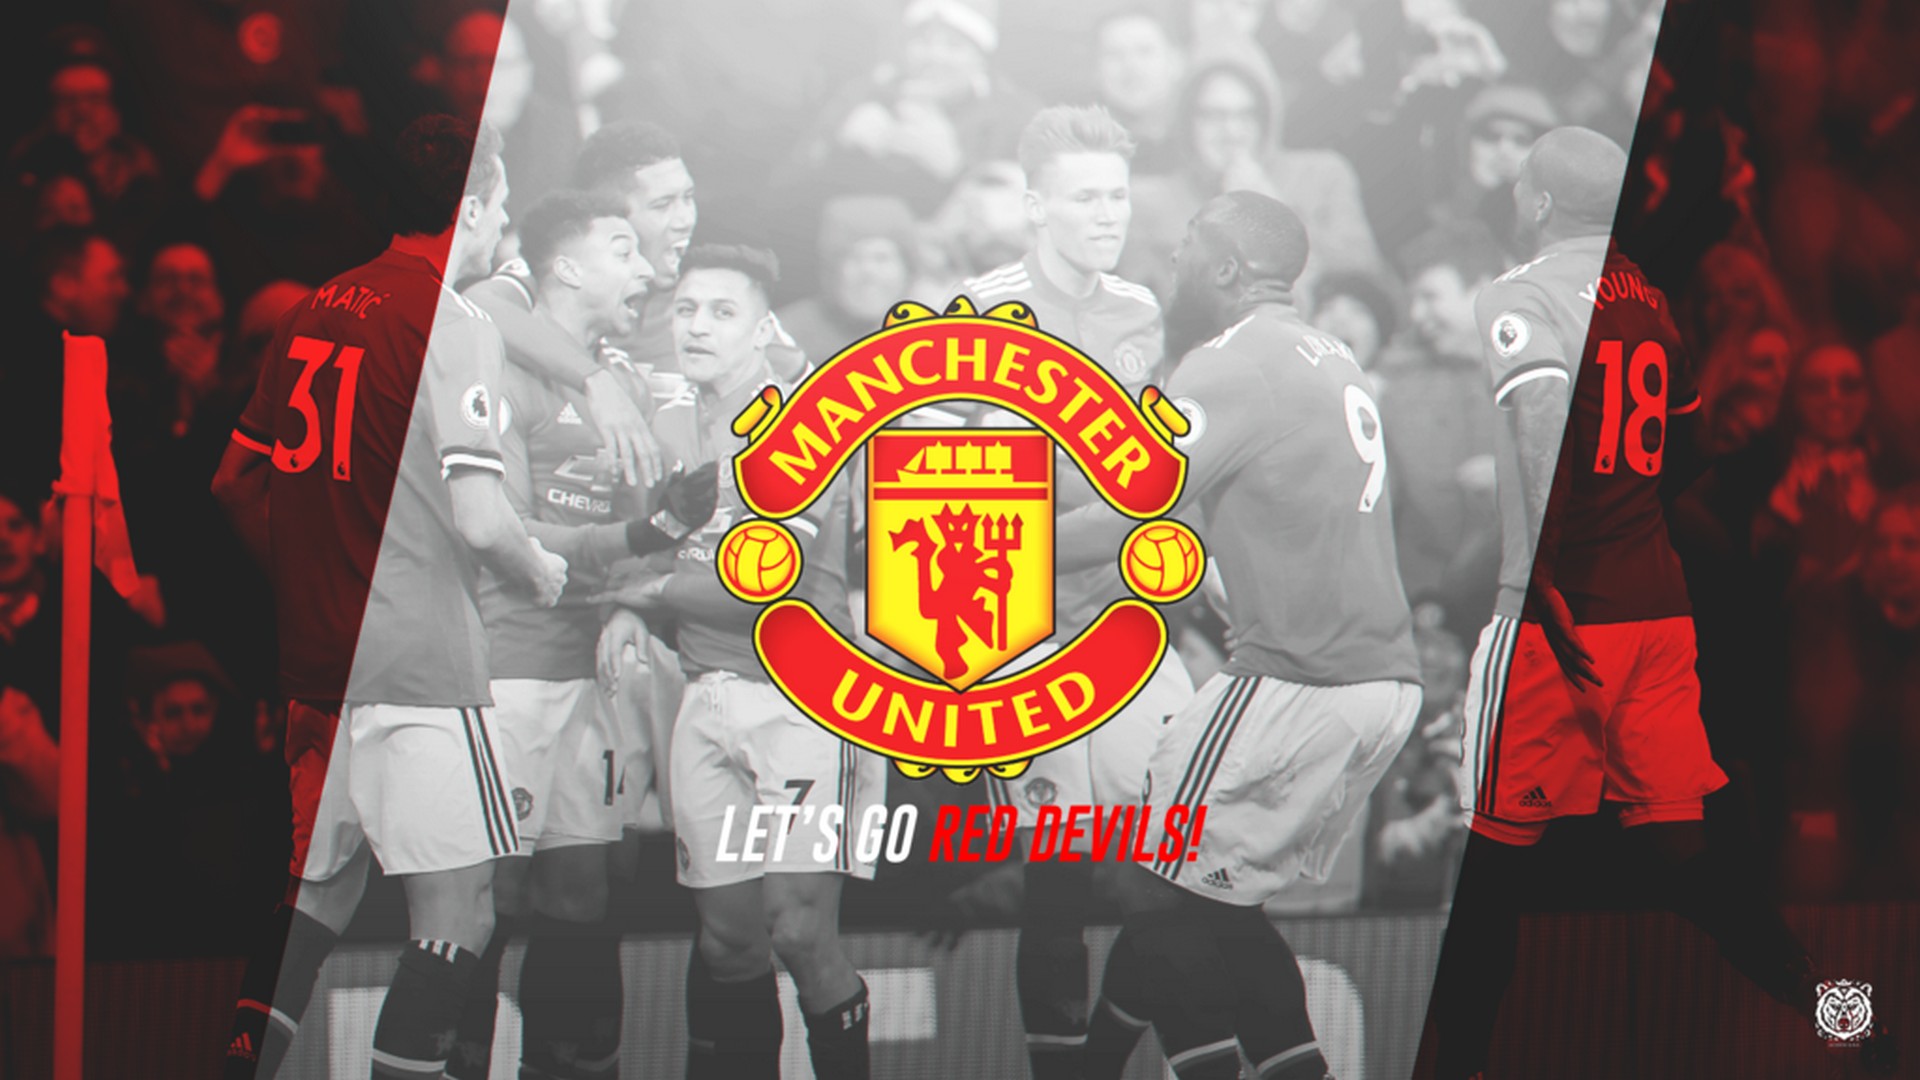 HD Desktop Wallpaper Manchester United with high-resolution 1920x1080 pixel. You can use this wallpaper for your Desktop Computers, Mac Screensavers, Windows Backgrounds, iPhone Wallpapers, Tablet or Android Lock screen and another Mobile device